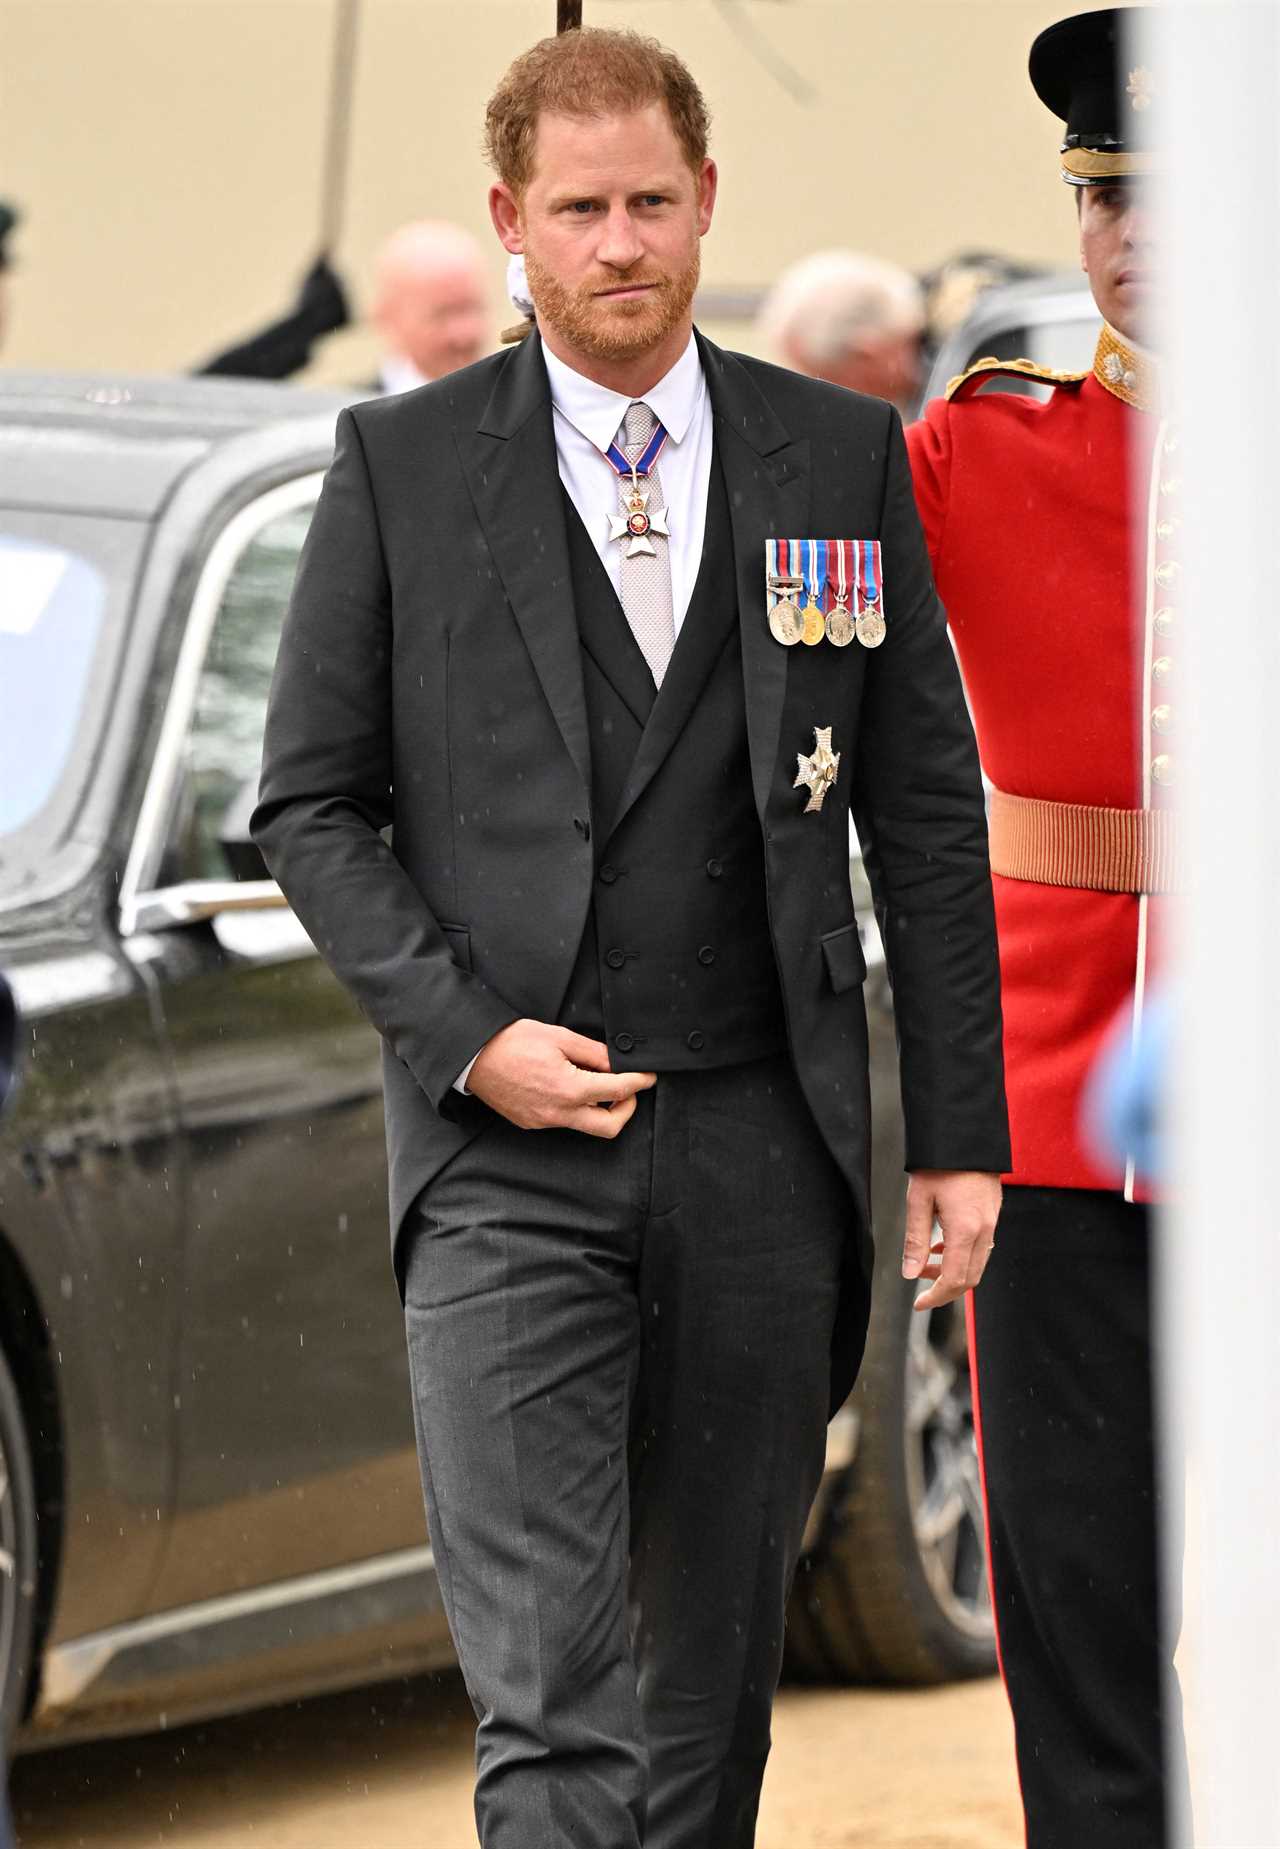 Prince Harry arrives for the coronation of King Charles at Westminster Abbey, London, Britan, May 6, 2023. Andy Stenning/Pool via REUTERS